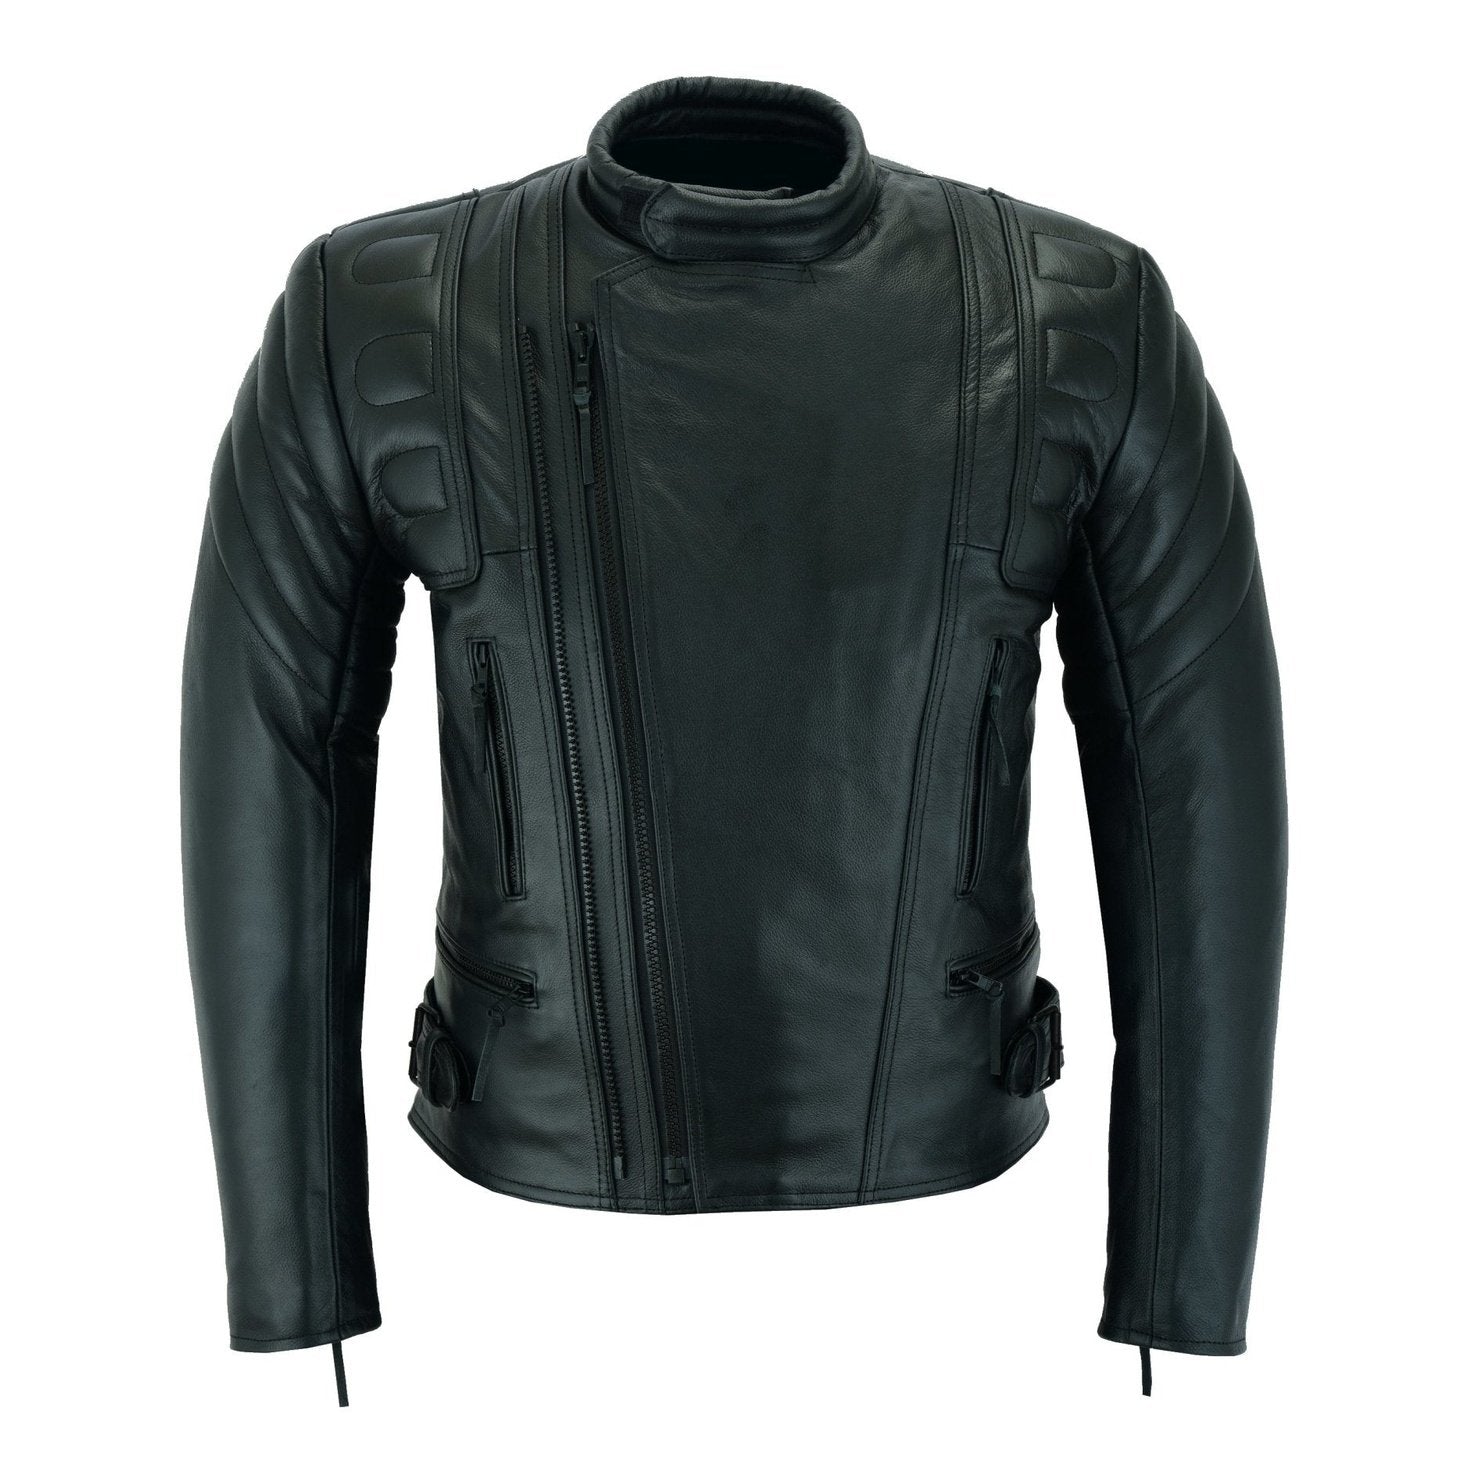 Limo Padded Motorcycle Police Leather Armoured Jacket – Vintage Leather